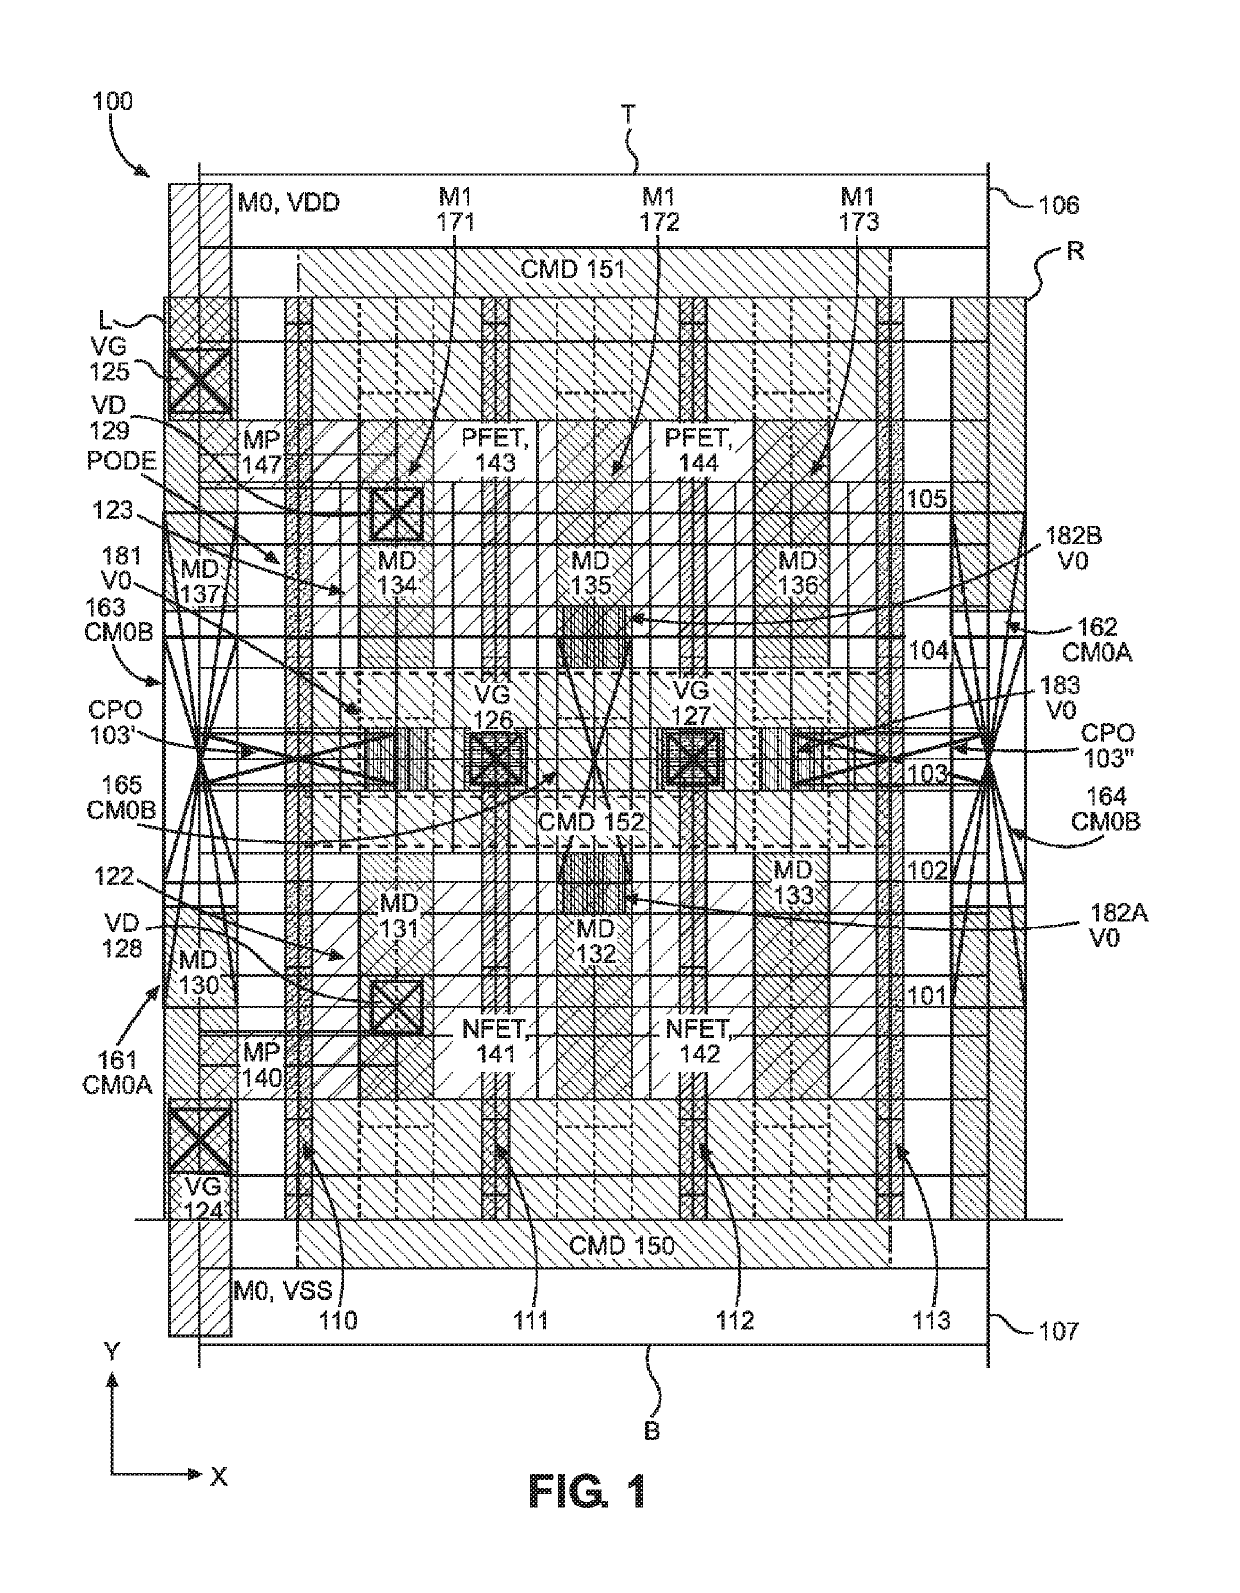 Integrated circuit (IC) design methods using engineering change order (ECO) cell architectures